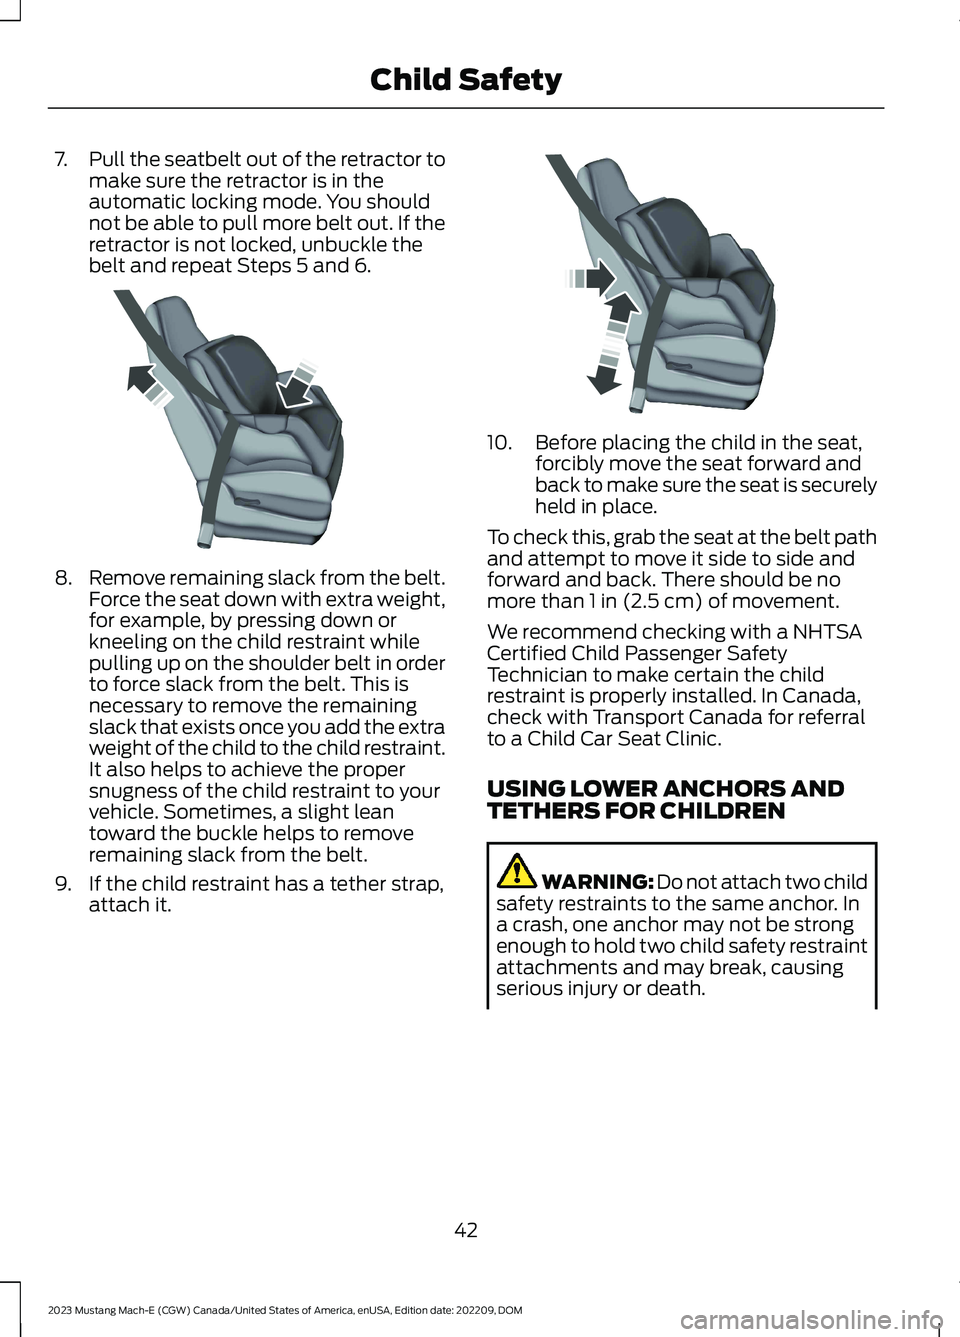 FORD MUSTANG MACH E 2023  Owners Manual 7.Pull the seatbelt out of the retractor tomake sure the retractor is in theautomatic locking mode. You shouldnot be able to pull more belt out. If theretractor is not locked, unbuckle thebelt and rep